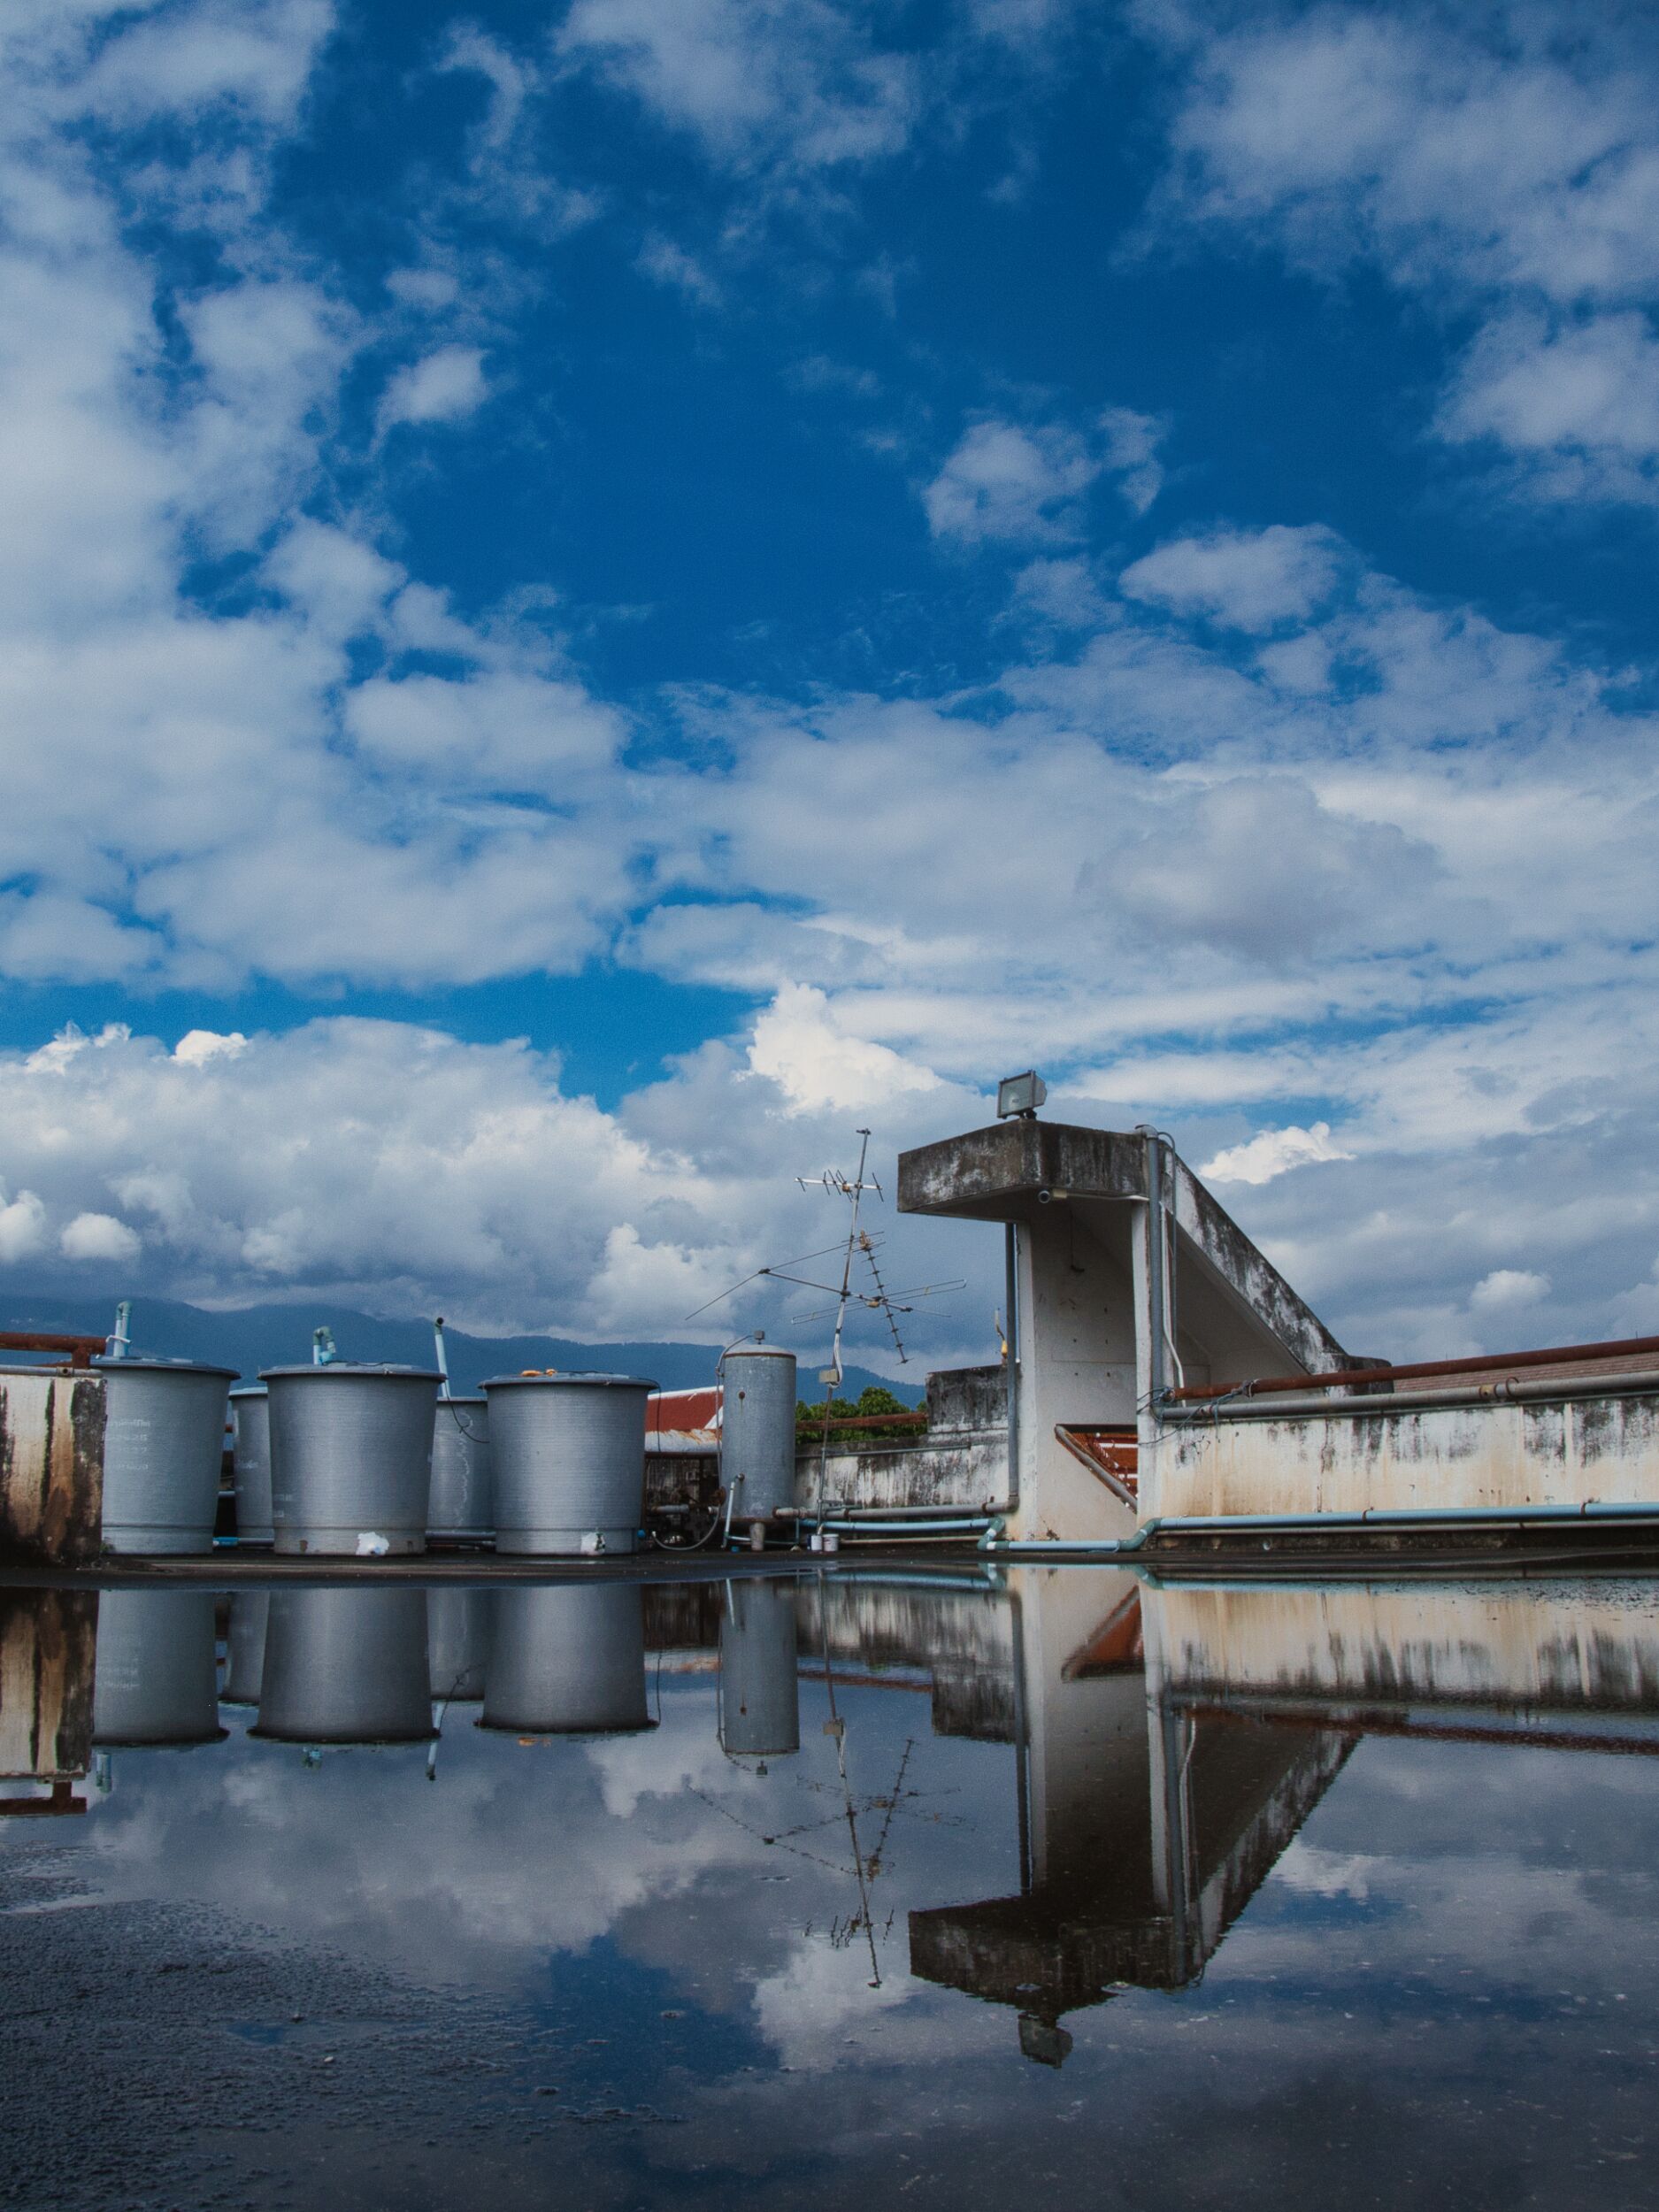 Roof top scene with water tanks and a cloudy sky for Luminar Neo review